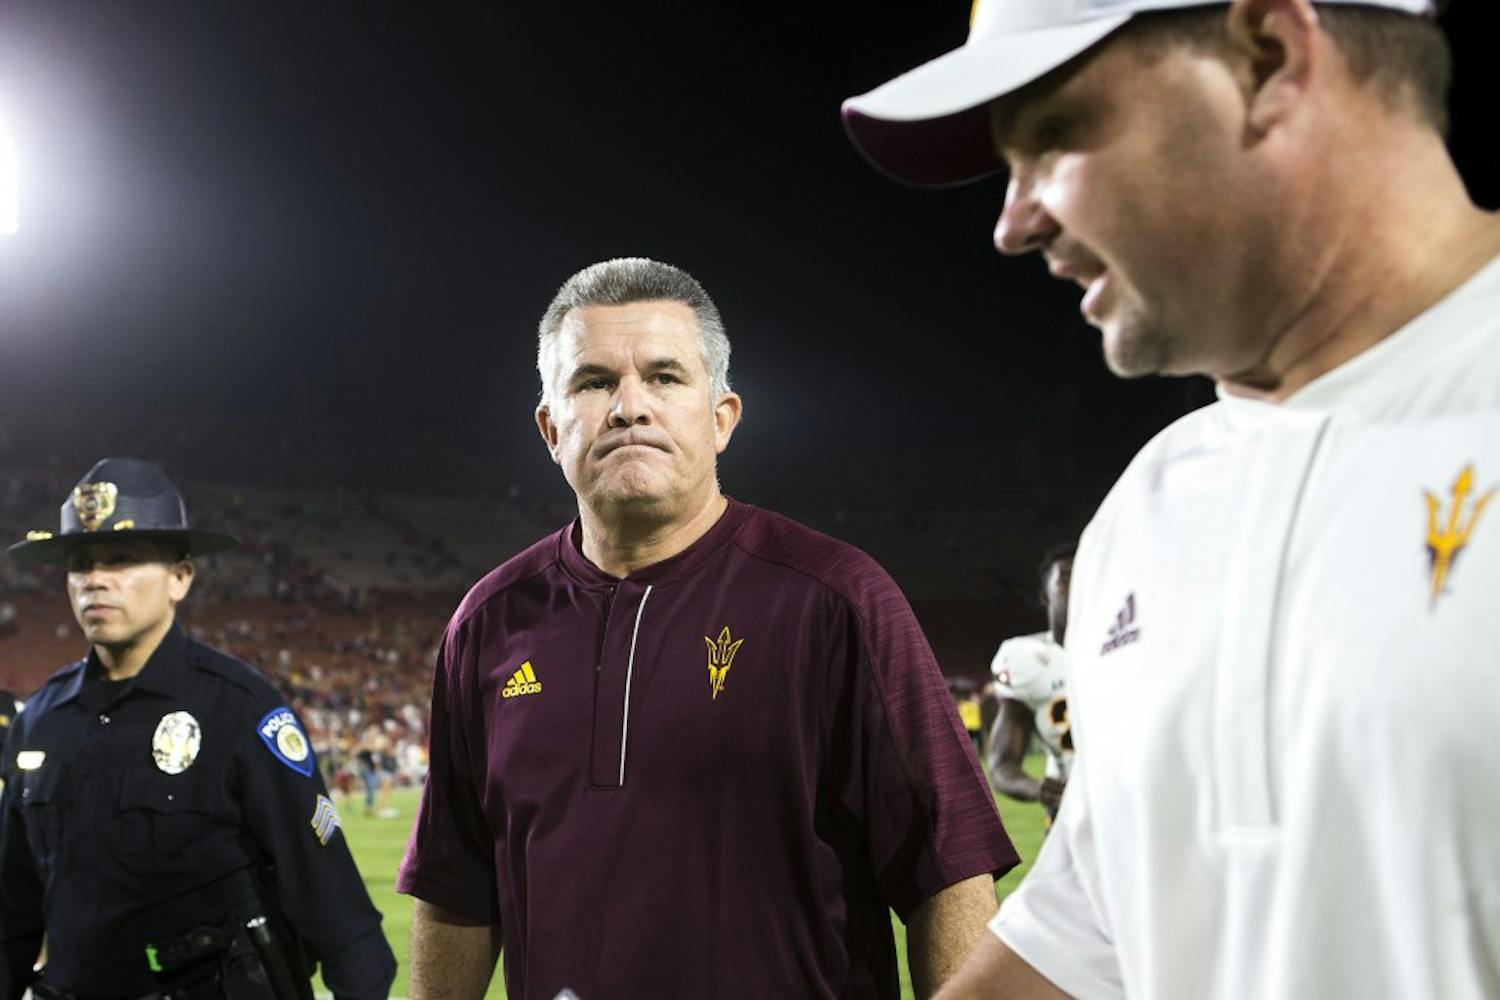 ASU Sun Devils head coach Todd Graham, center, walks off the field after a loss to the USC Trojans in the Los Angeles Memorial Coliseum on Saturday, Oct. 1, 2016. 